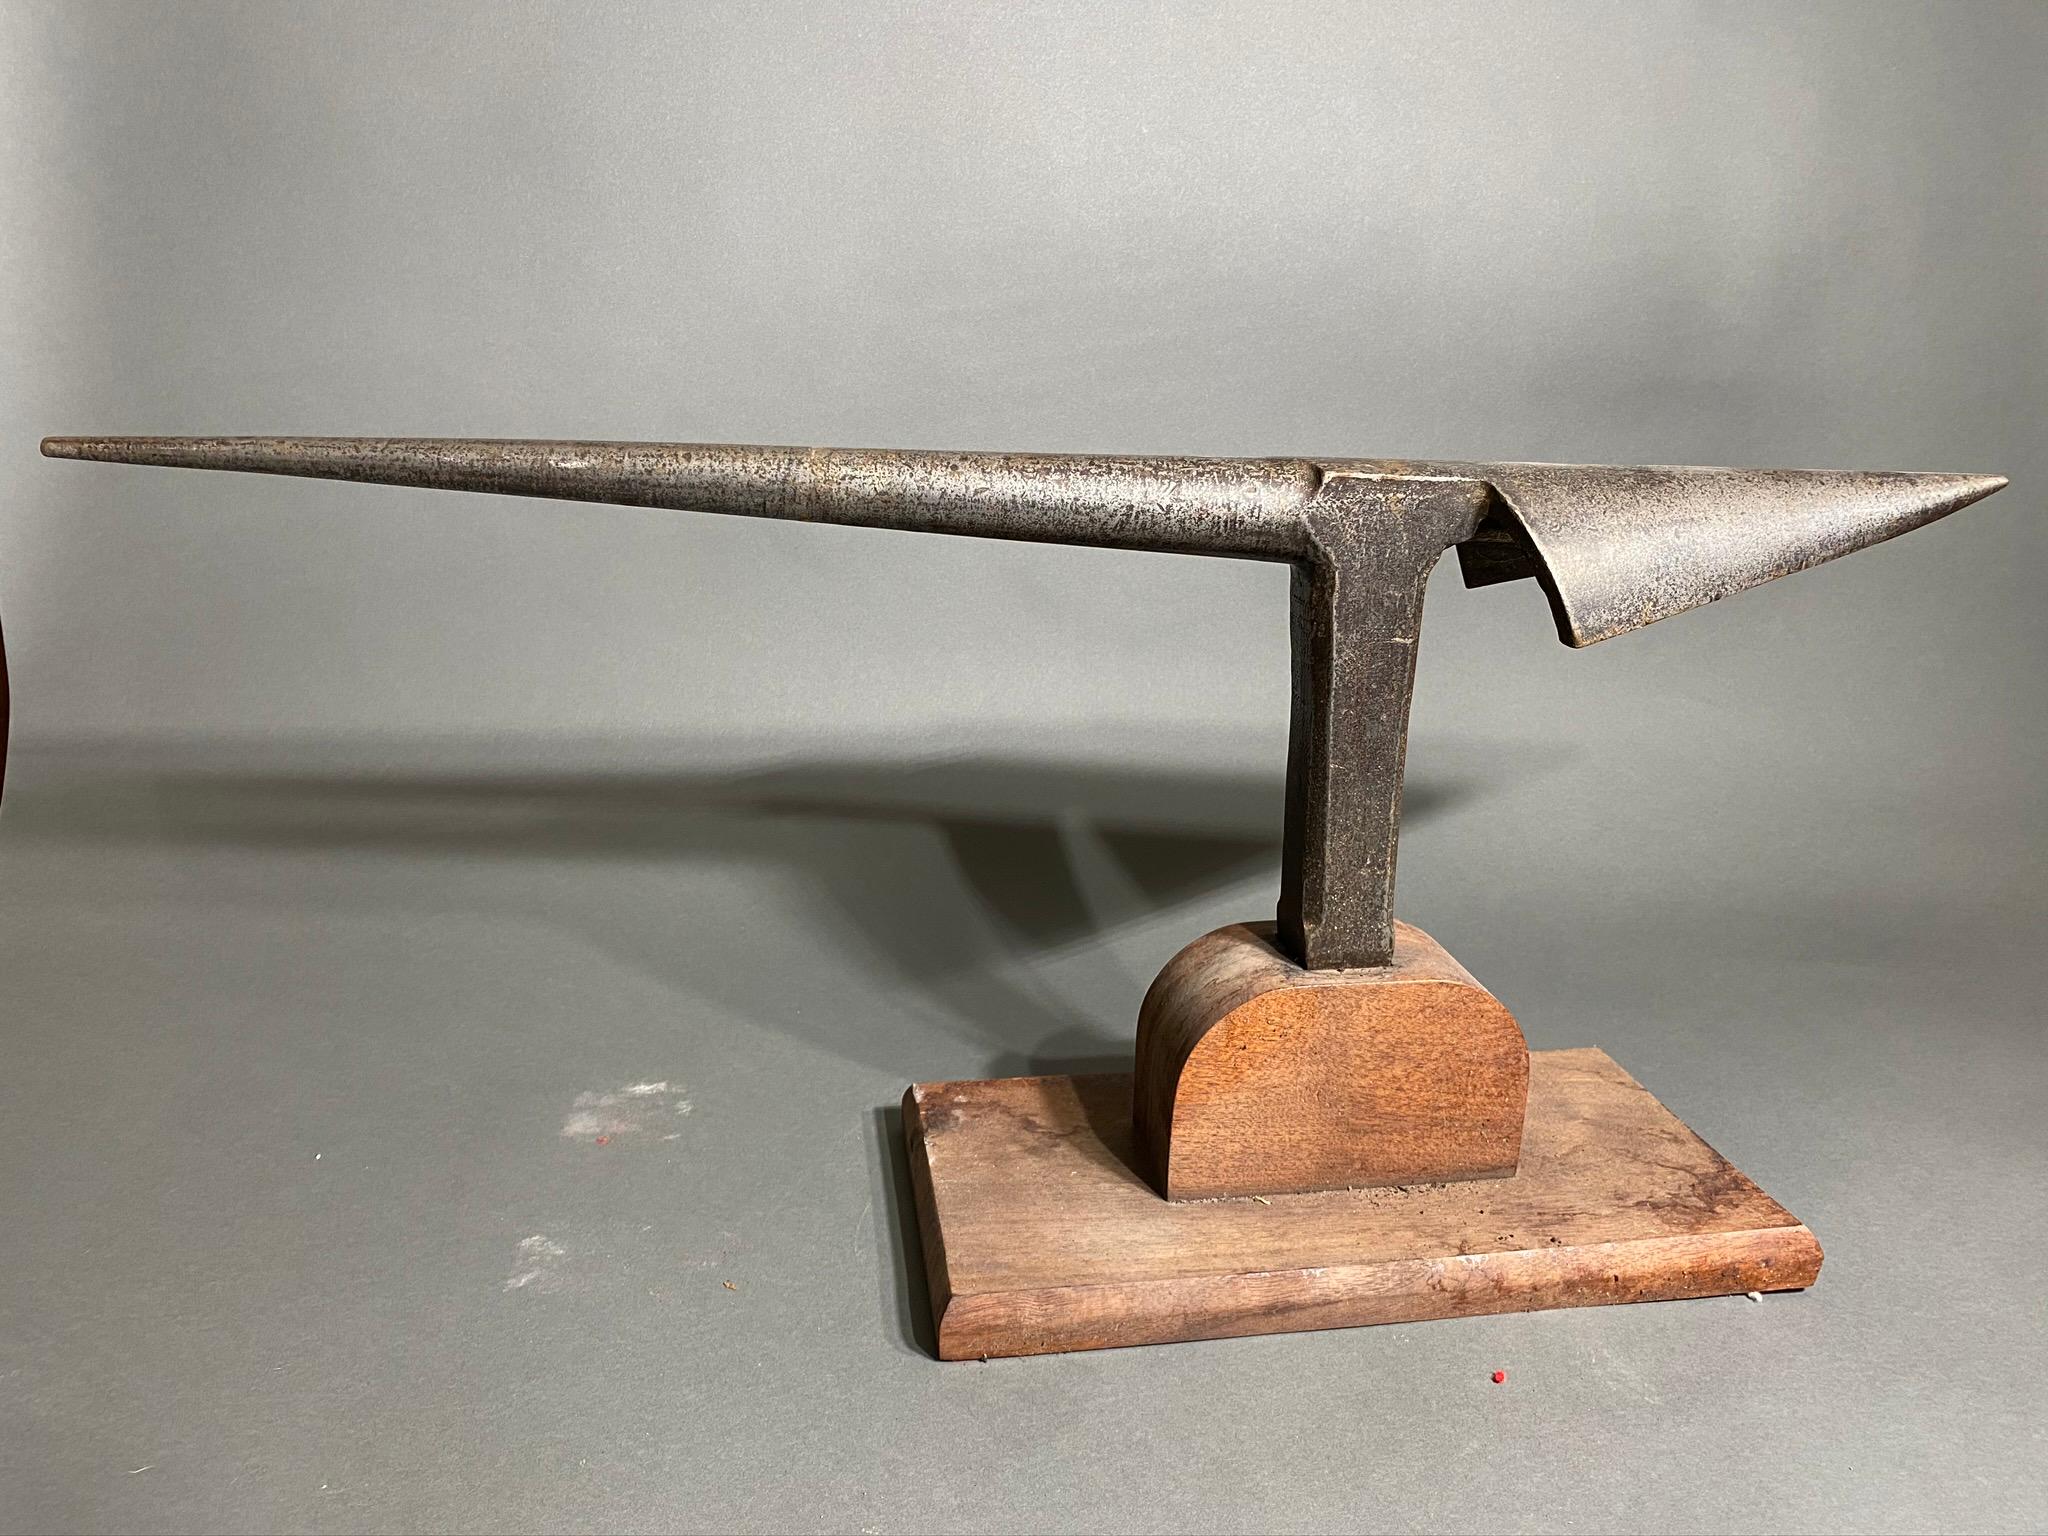 Antique Tinsmith's Blowhorn Stake Anvil